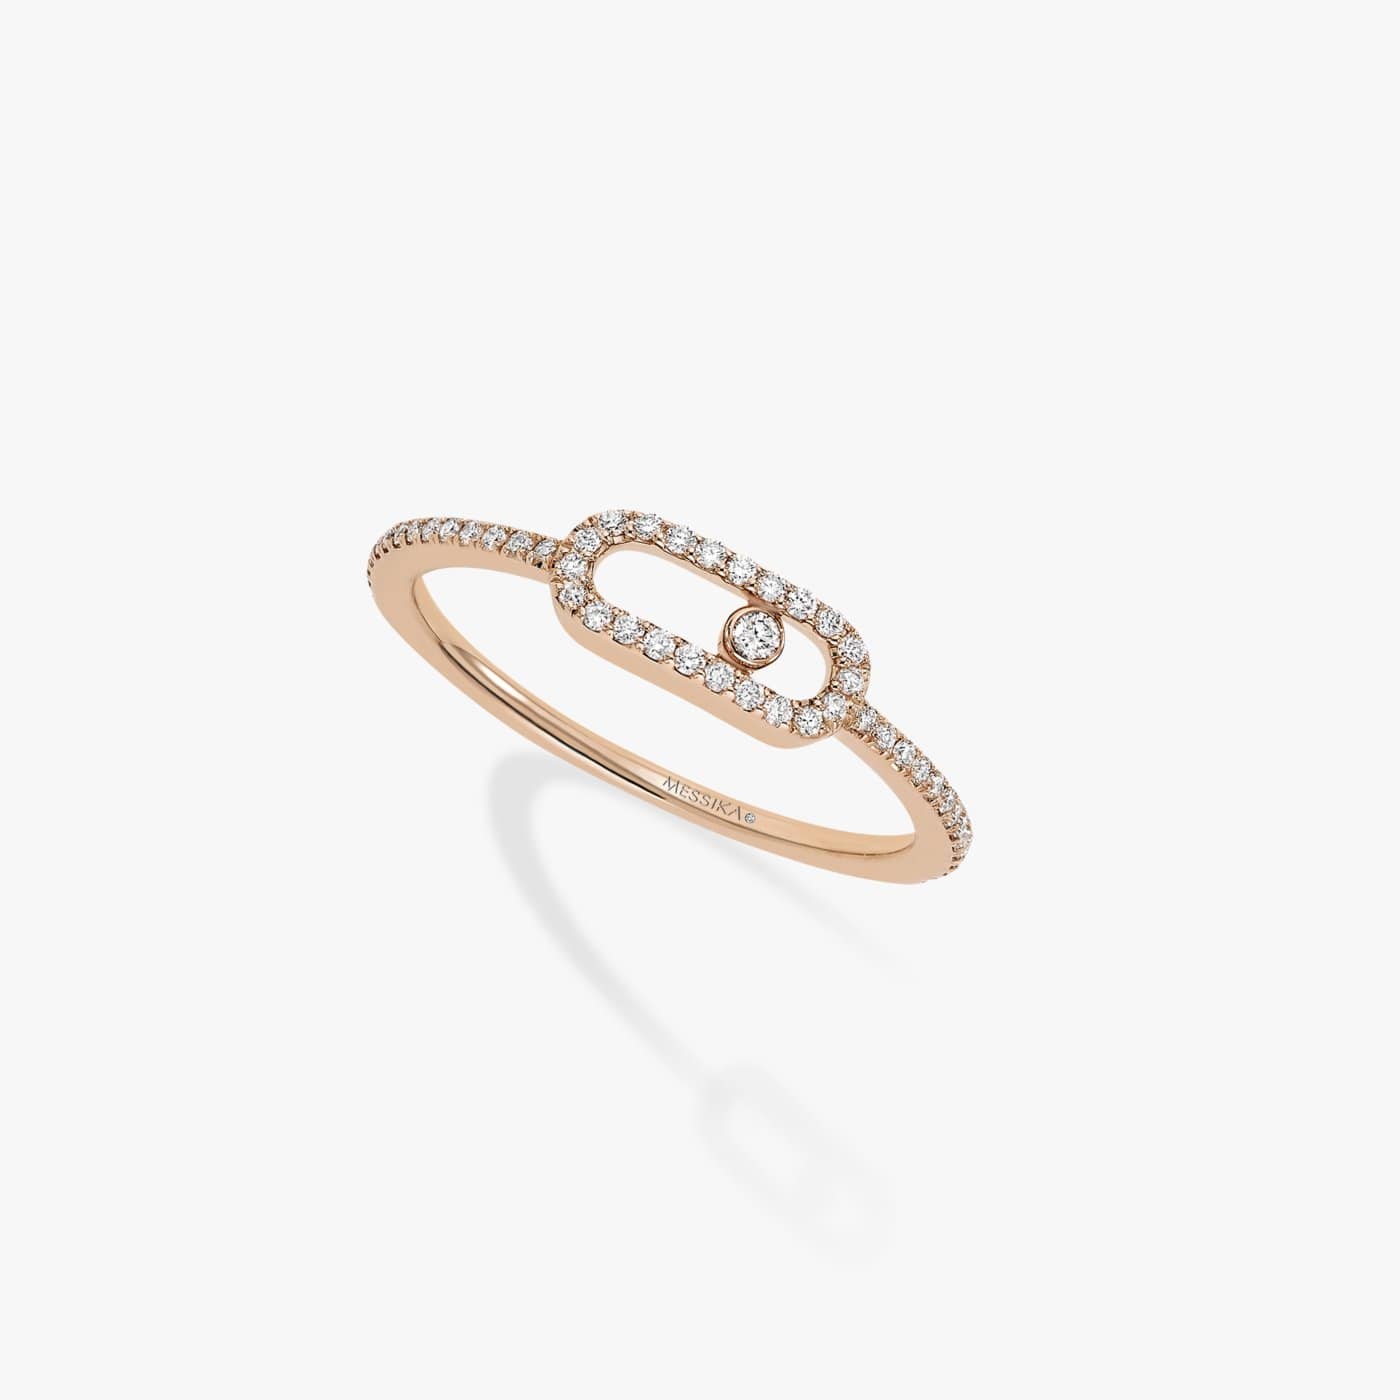 MESSIKA-Move Uno Pave Ring-ROSE GOLD